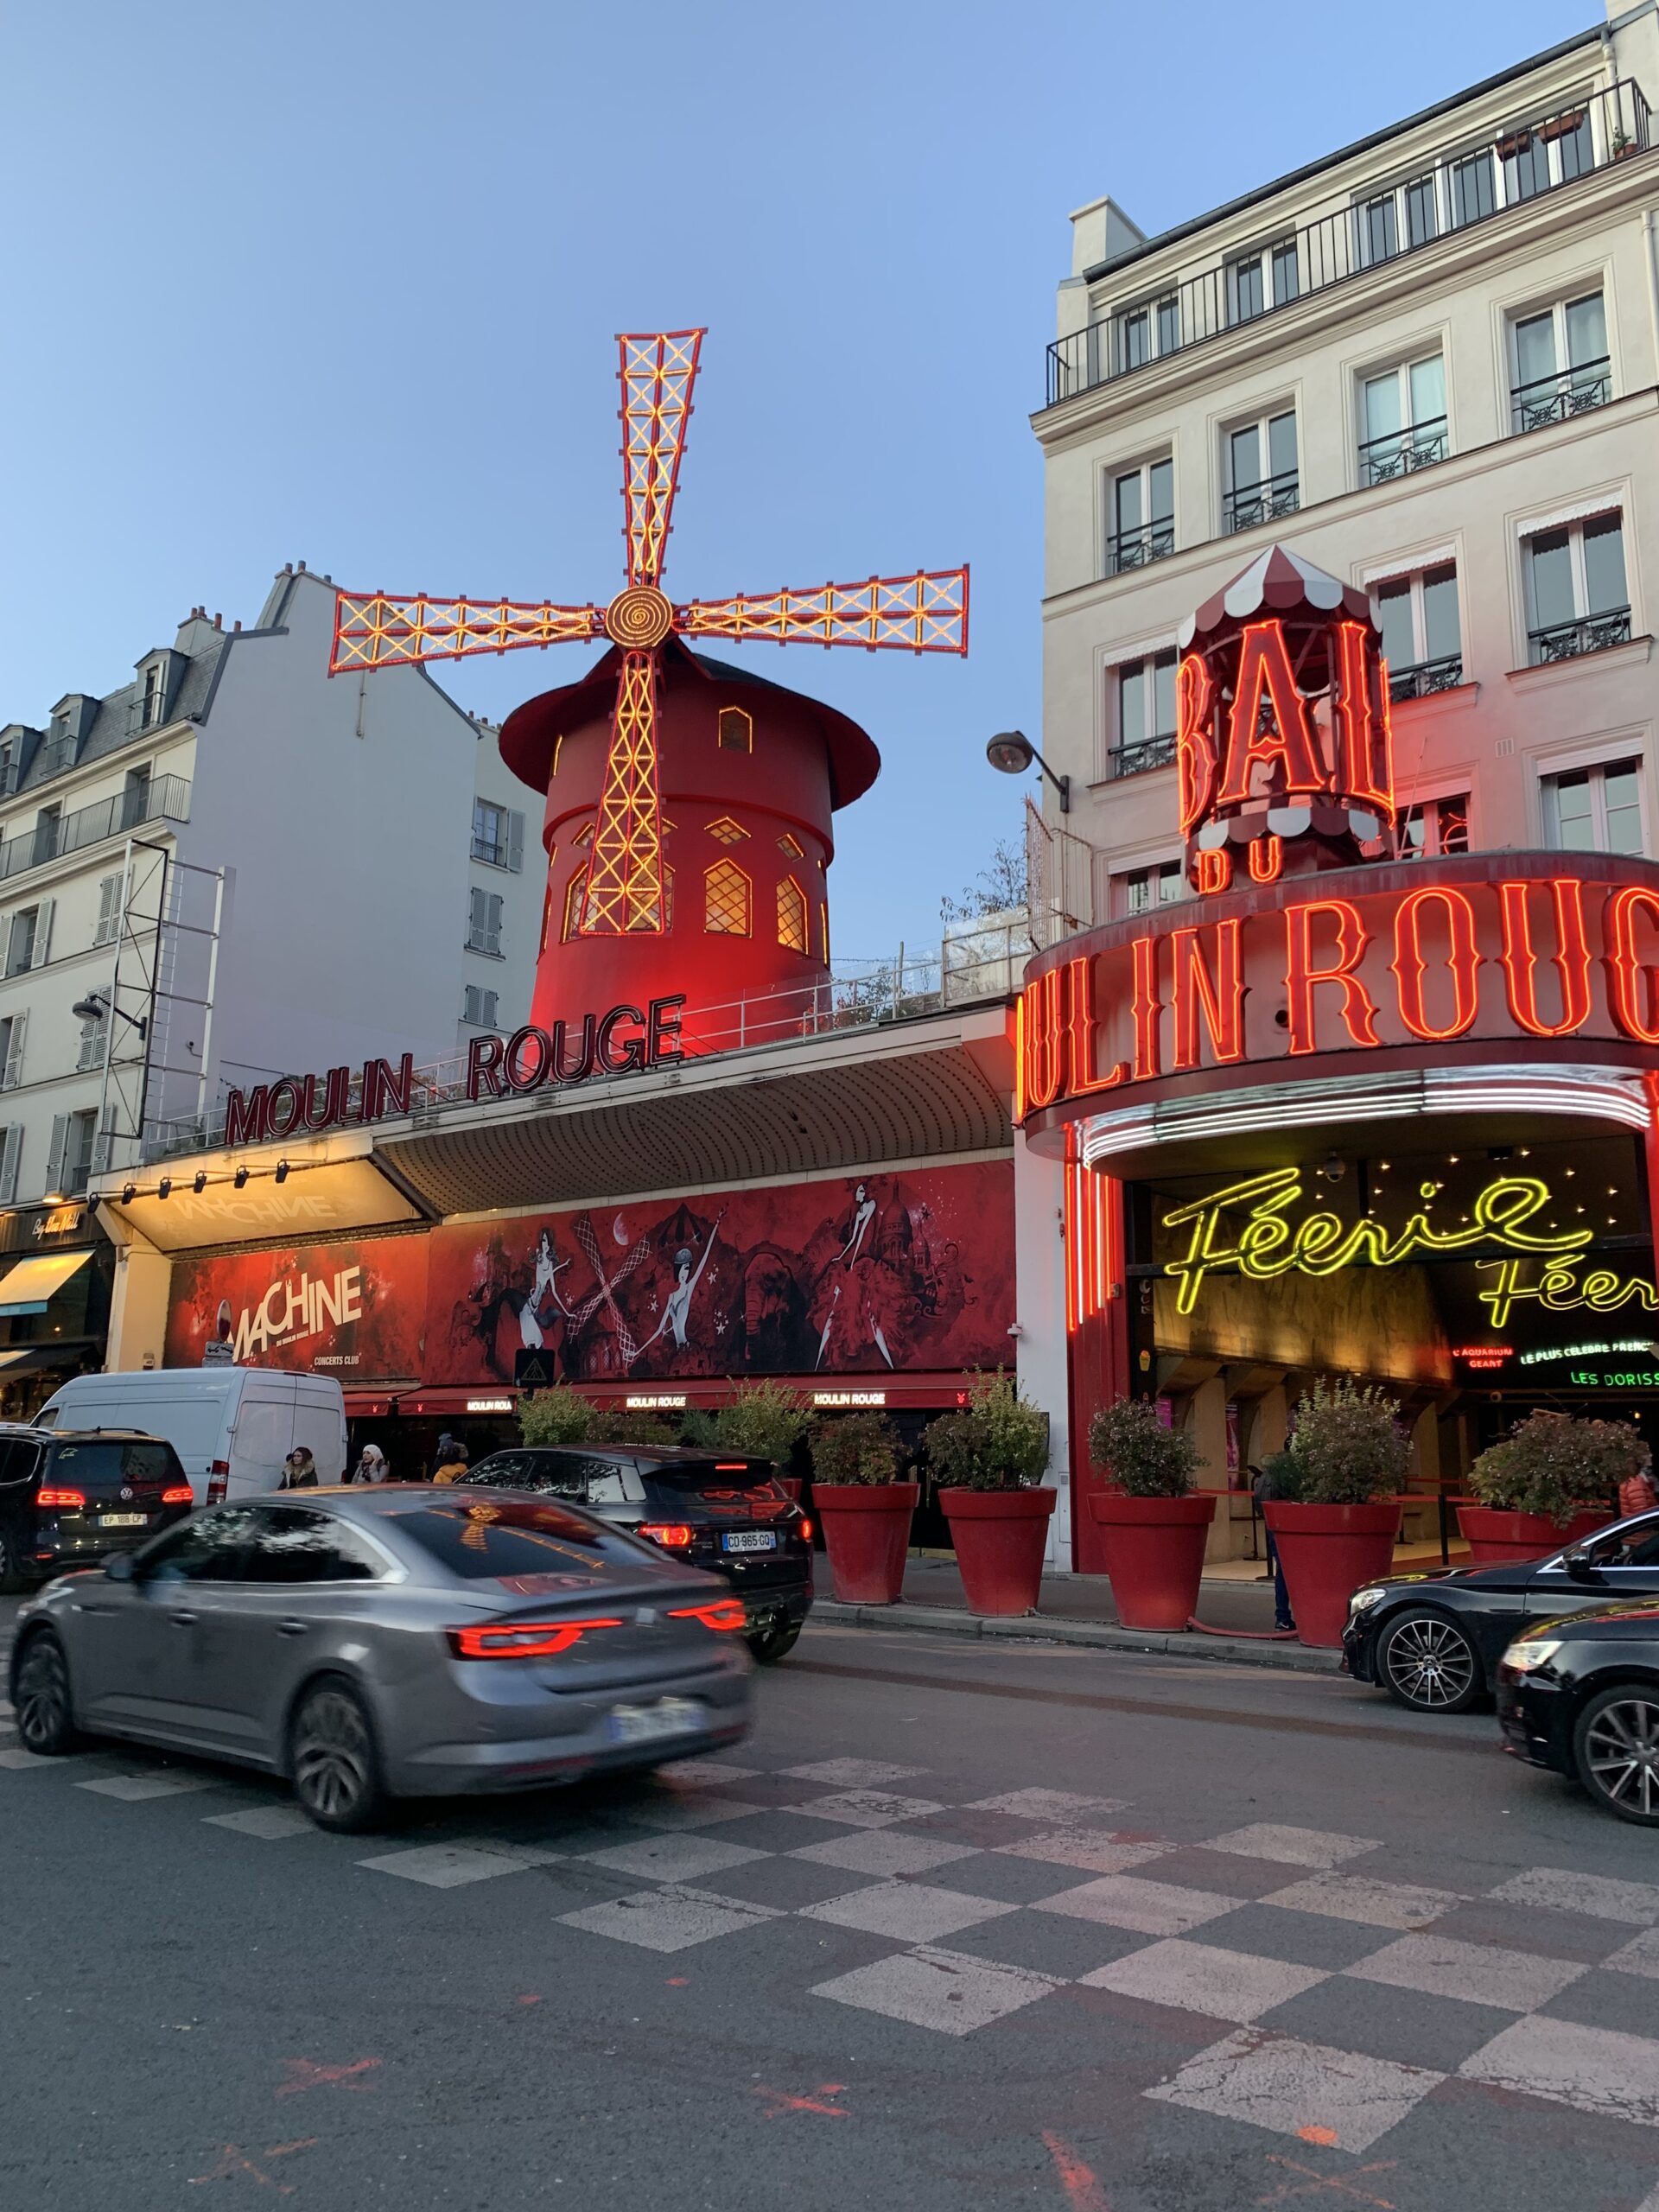 The Moulin Rouge lit up at night from the outside. You can see the windmill and the building. 